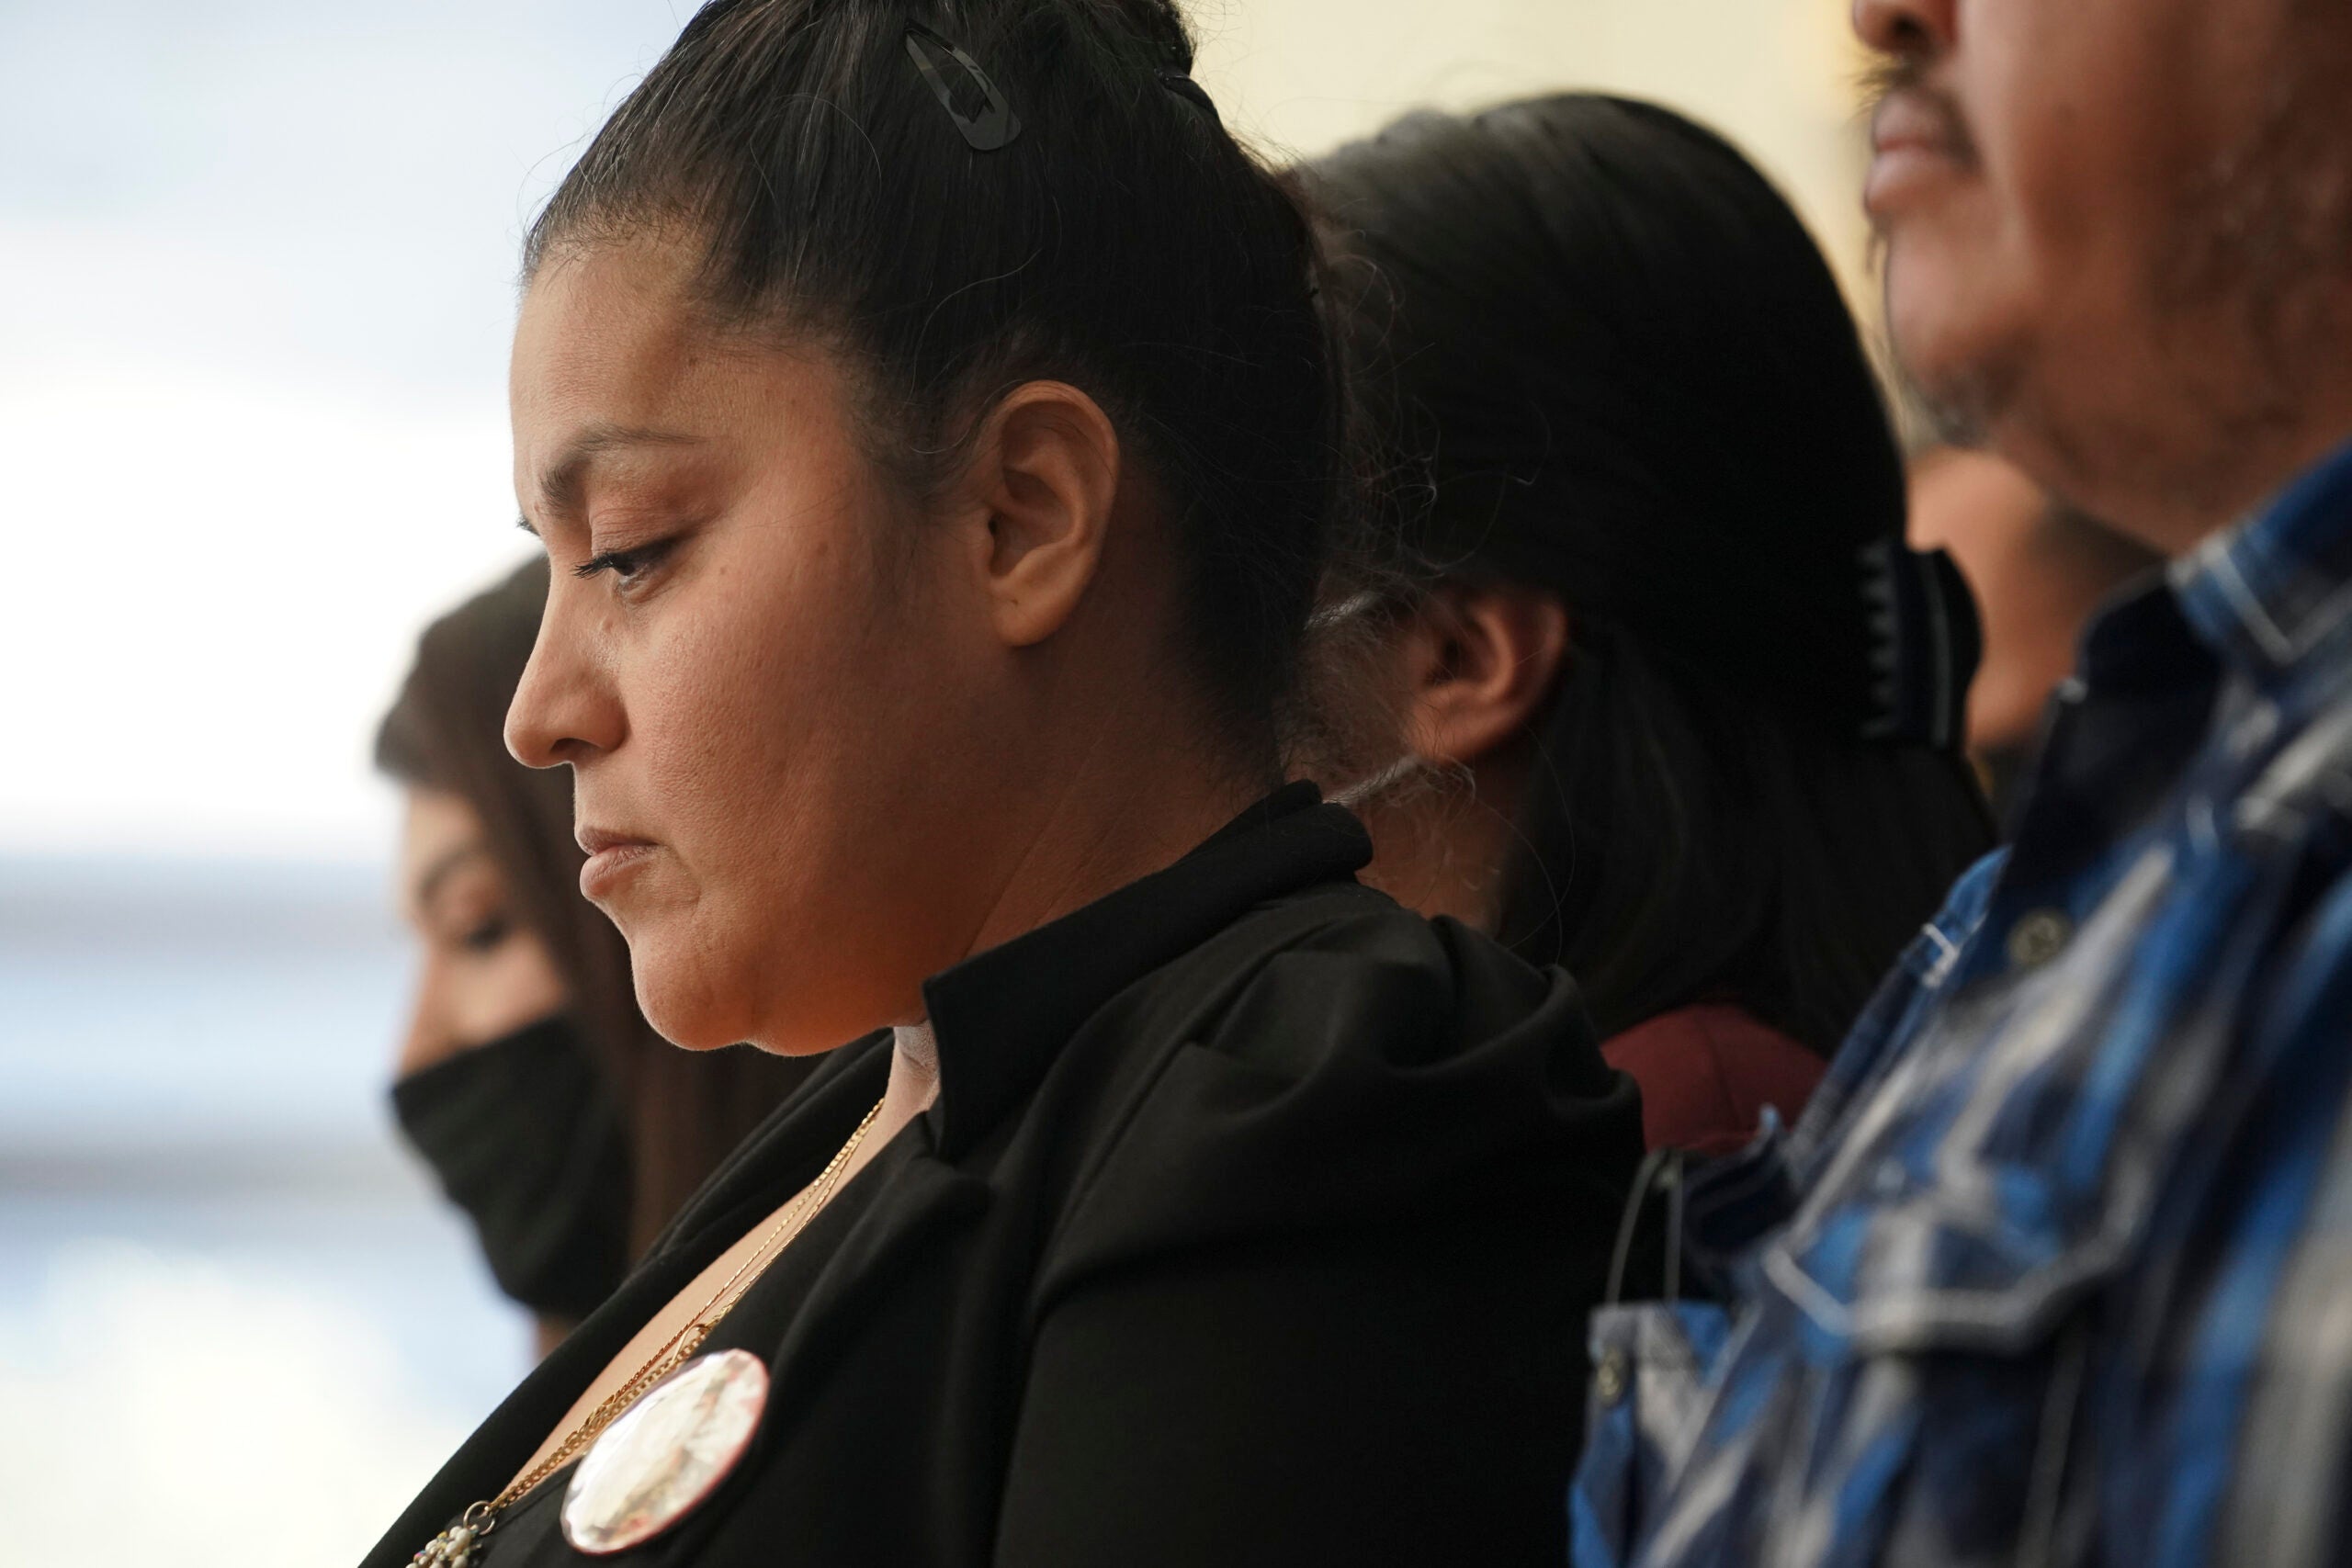 HOUSTON, TX - DECEMBER 08: Vanessa Guillen's mother Gloria Guillen  attends a press conference regarding the murder of Vanessa Guillen on December 8, 2020 in Houston, Texas. Vanessa Guillen, a 20-year-old U.S. Army Specialist, was found dead on June 30 after she had been reportedly missing since April 22. Guillen was allegedly killed by fellow soldier Aaron David Robinson inside the Fort Hood military base.(Photo by Go Nakamura/Getty Images)